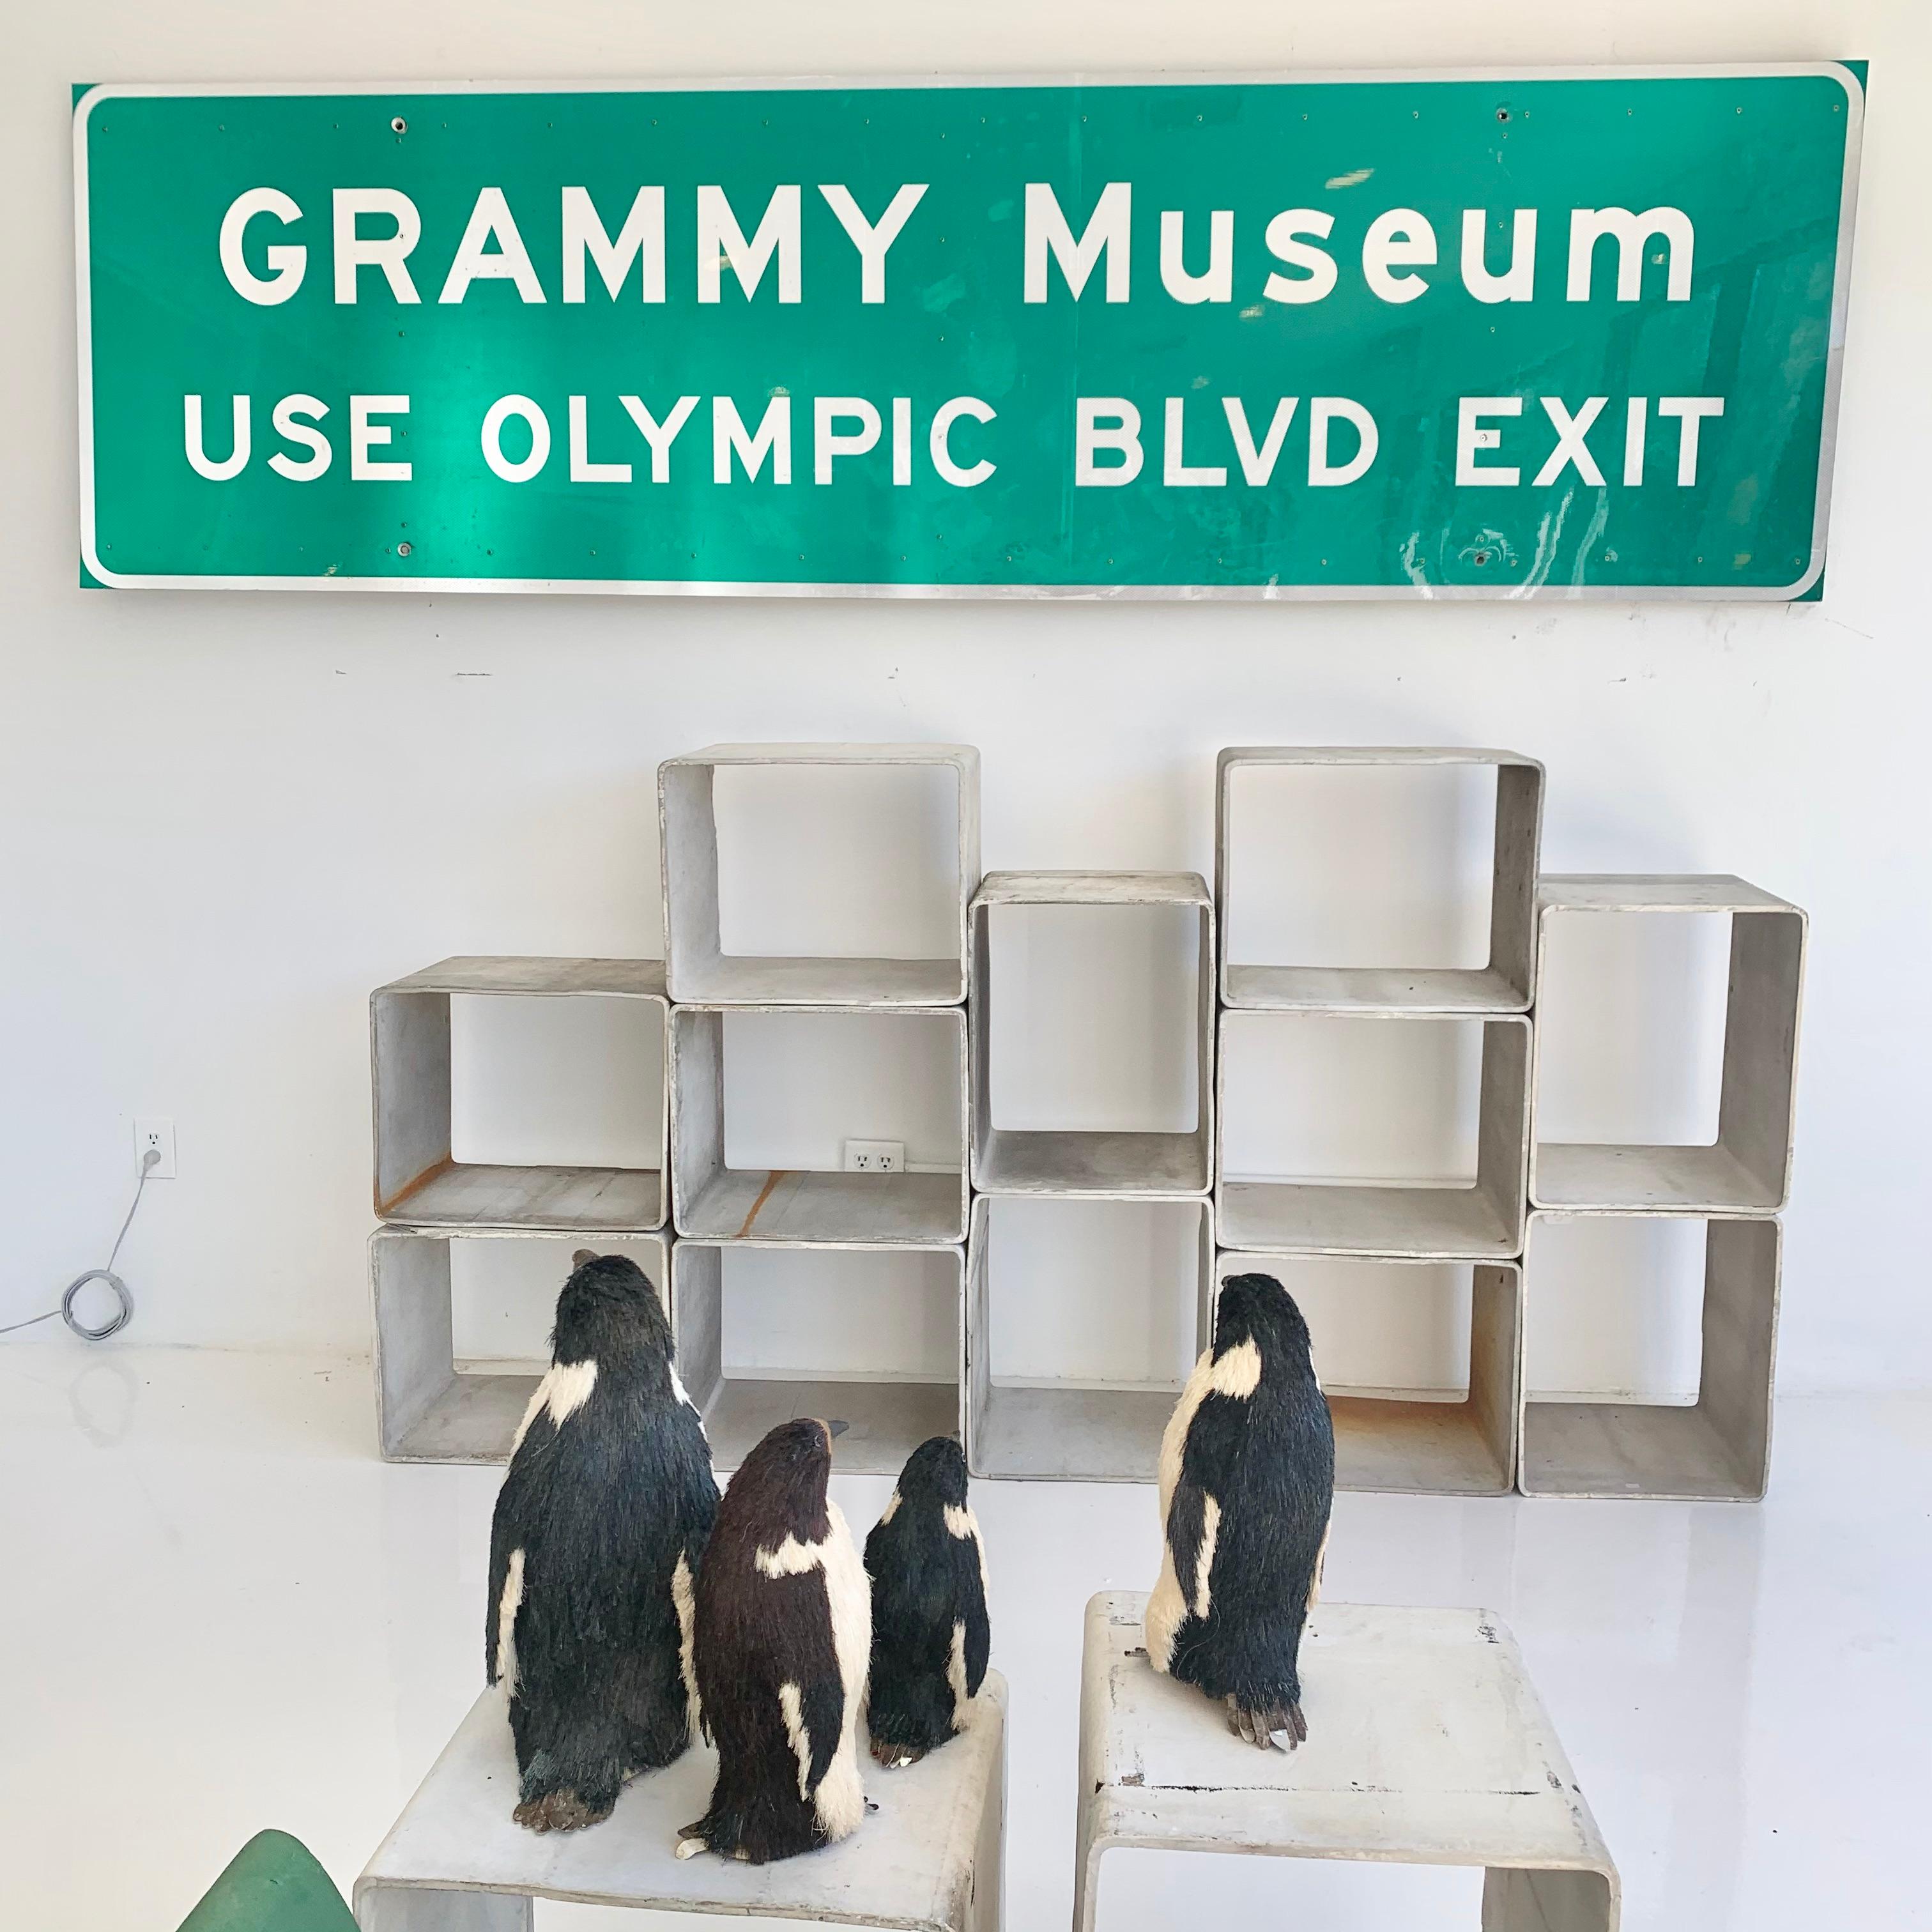 Super cool Los Angeles freeway sign. 10.5 feet long and 3 feet tall. Metal sign, likely from 10 Freeway. Sign depicts the exit ramp for the GRAMMY MUSEUM, founded in 2008 in Downtown Los Angeles. Green reflective background with white lettering.